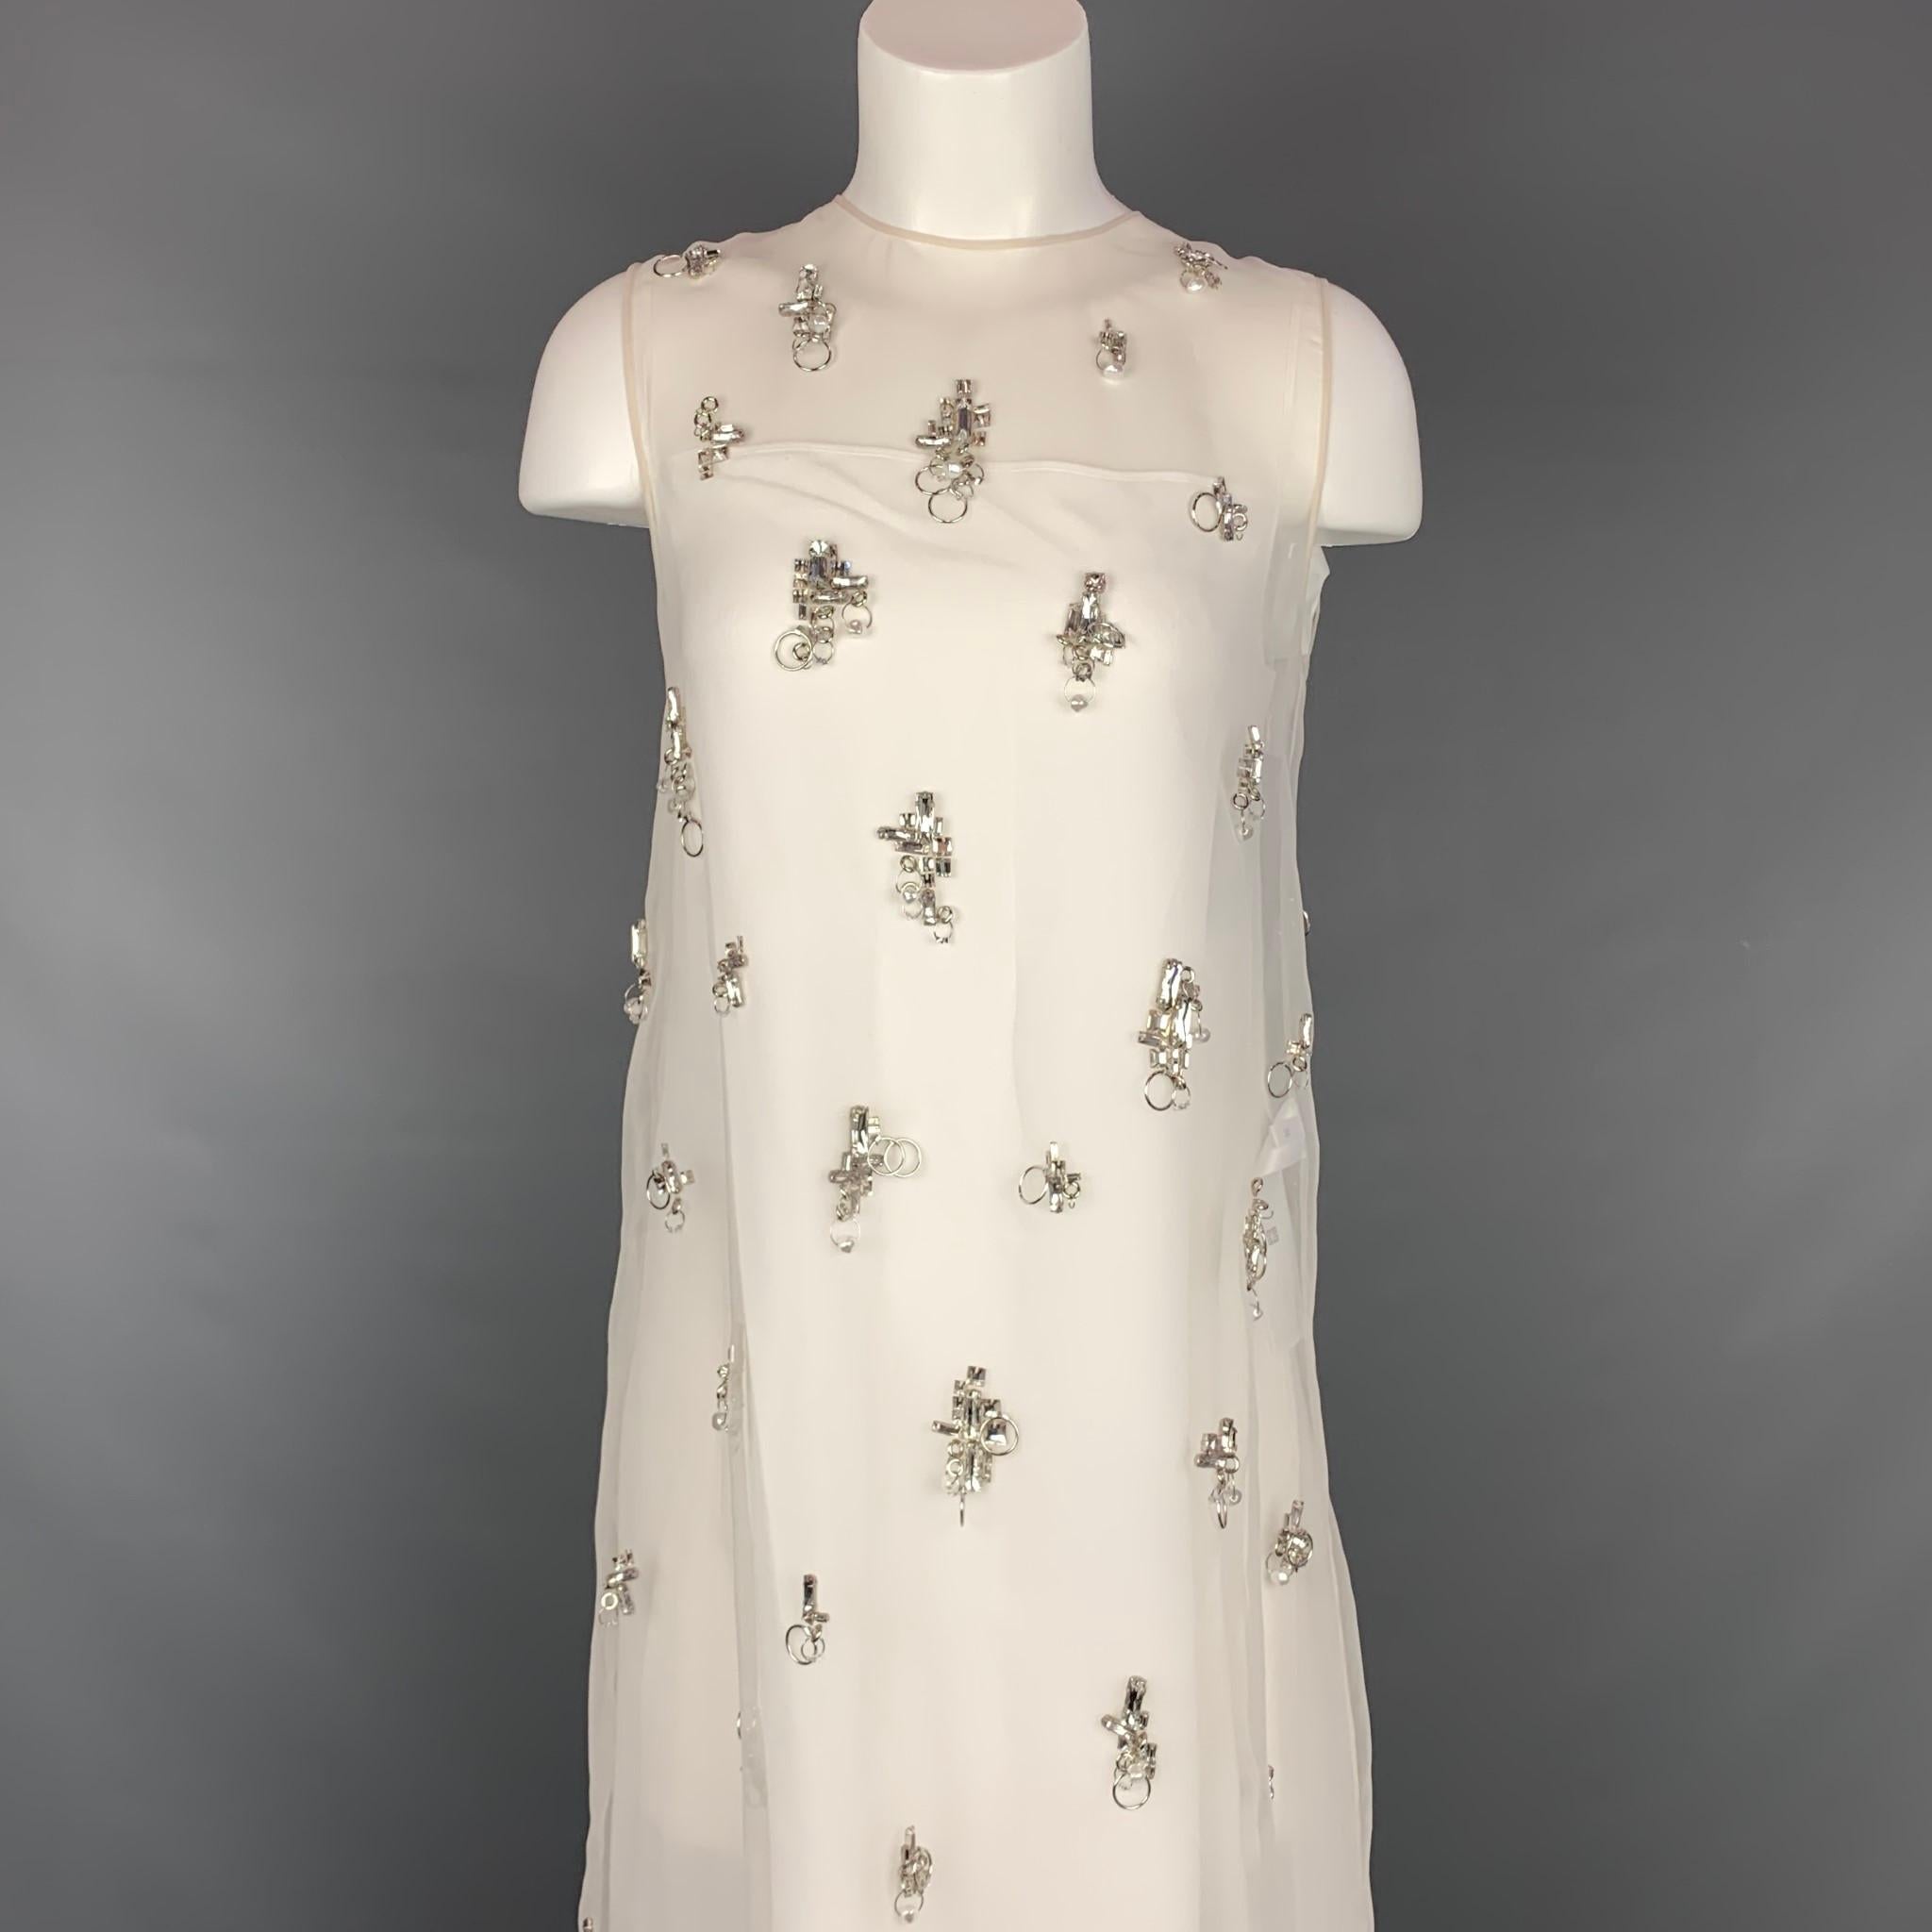 GIVENCHY Spring Summer 2021 dress comes in a cream organza polyester with a slip liner featuring a shift style, crystal accents with hoops, faux pearls, back leather trim, and a exposed back zipper closure. Made in France.

New With Tags. 
Marked: